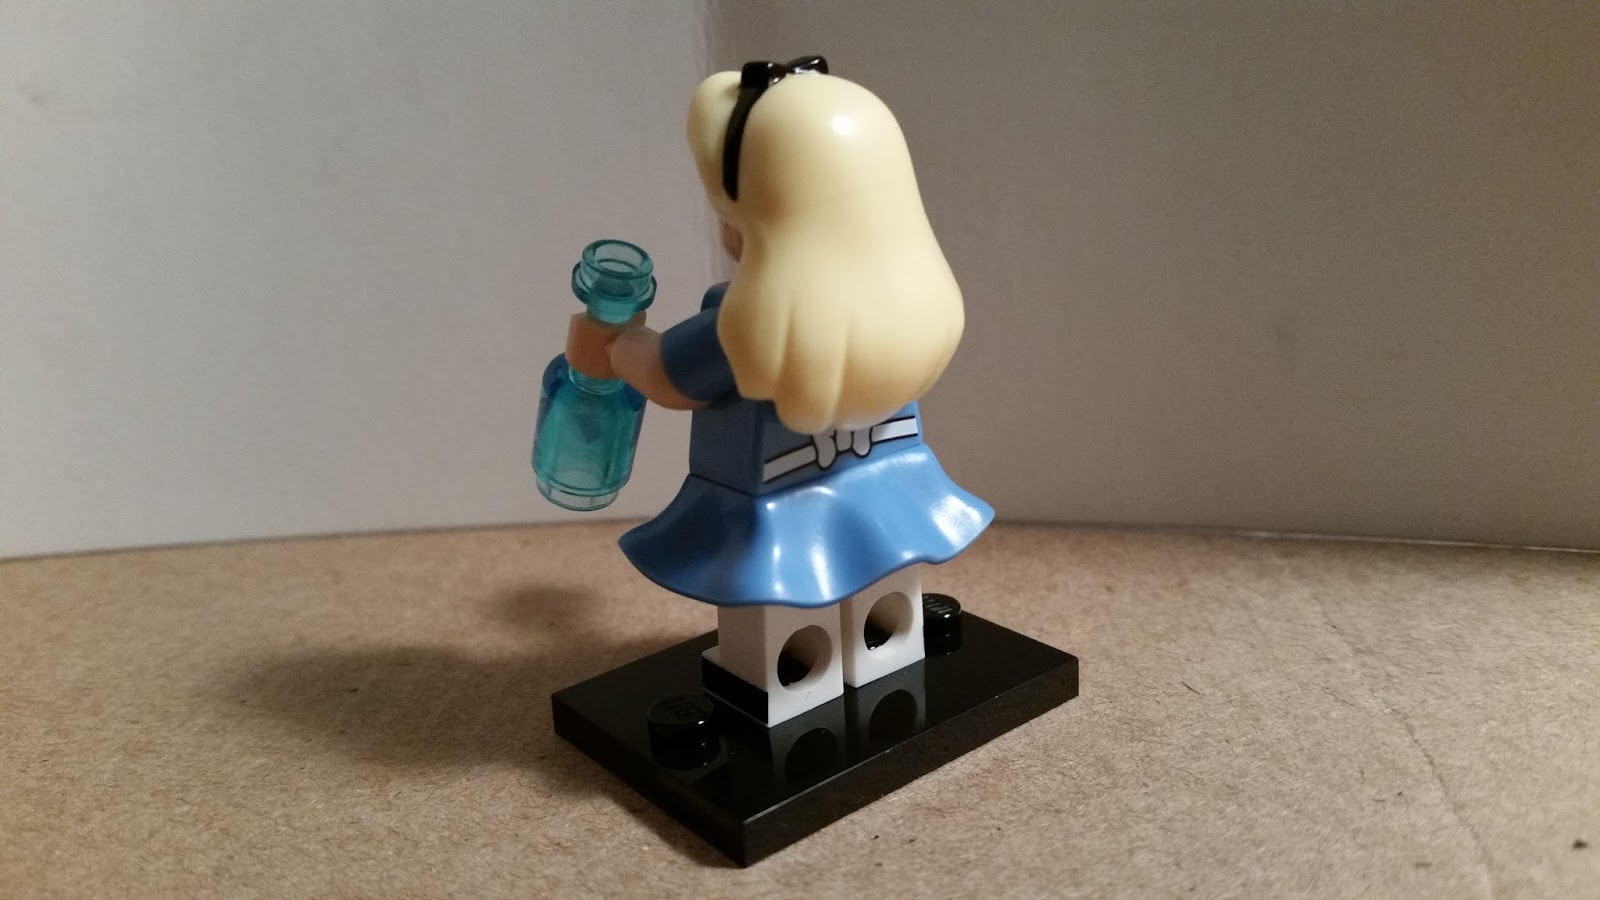 LEGO Alice (in Wonderland) (without accessories)